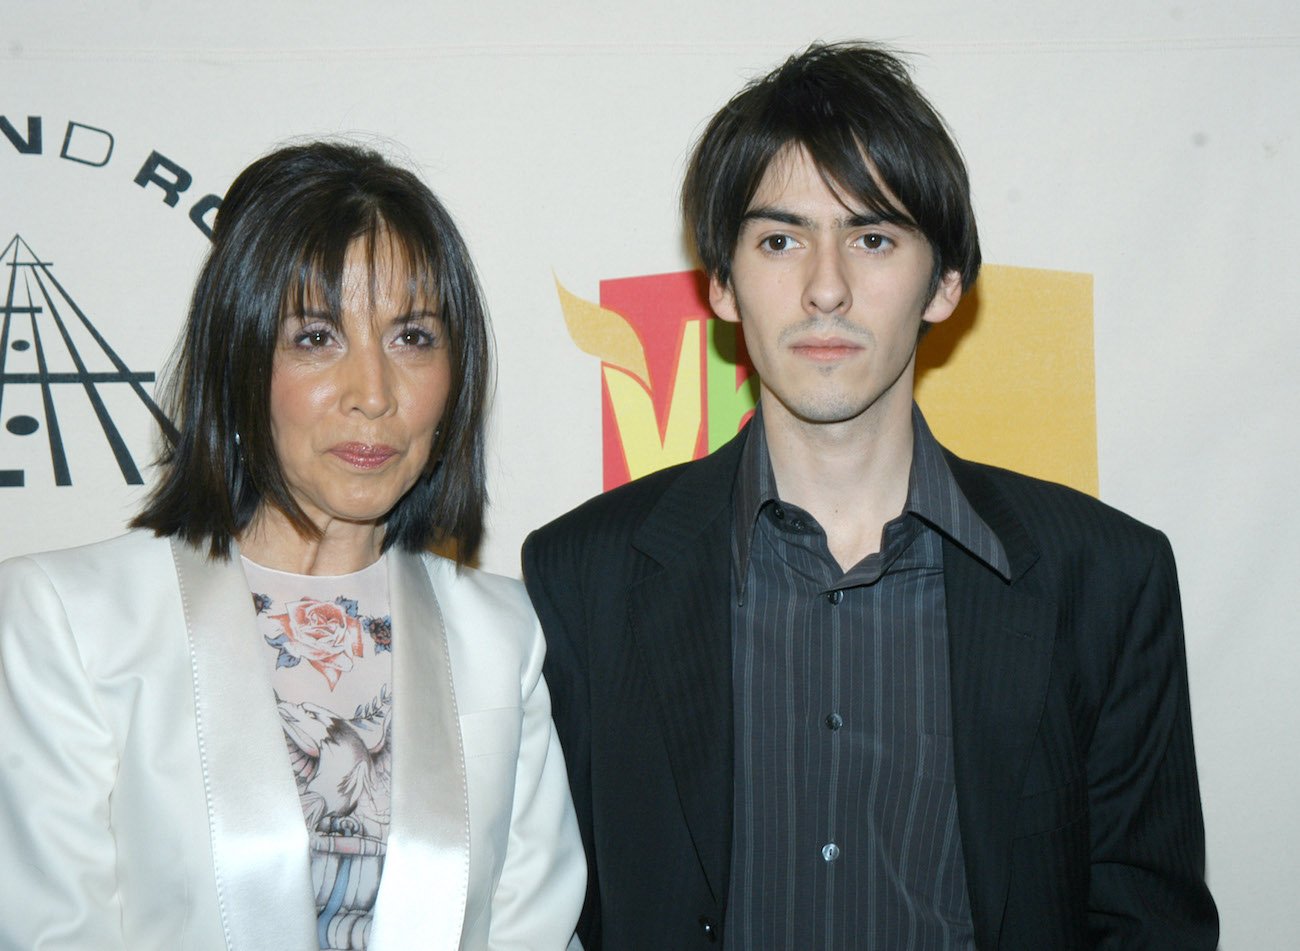 George Harrison's son, Dhani, and his mother, Olivia, at George's Rock & Roll Hall of Fame induction in 2004.